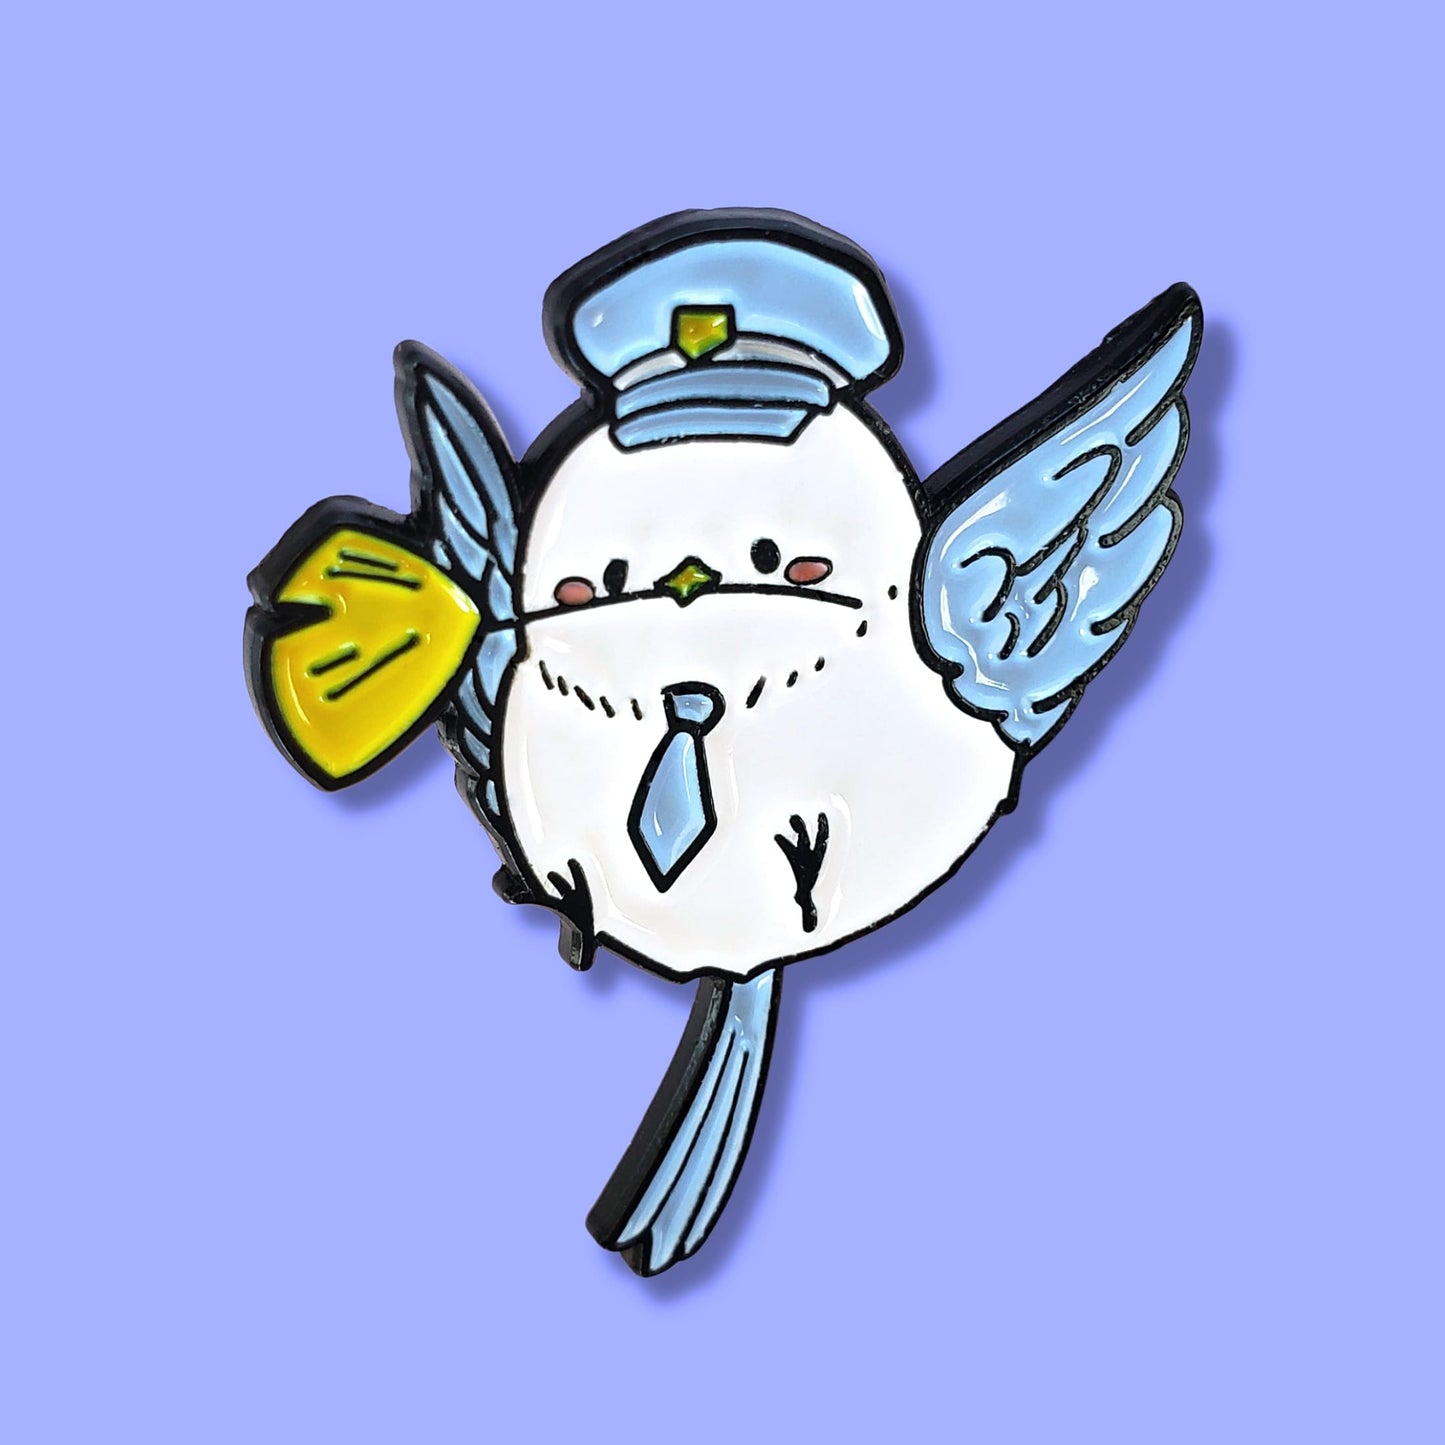 Special Delivery Mail Bird Enamel Pin from Confetti Kitty, Only 4.99